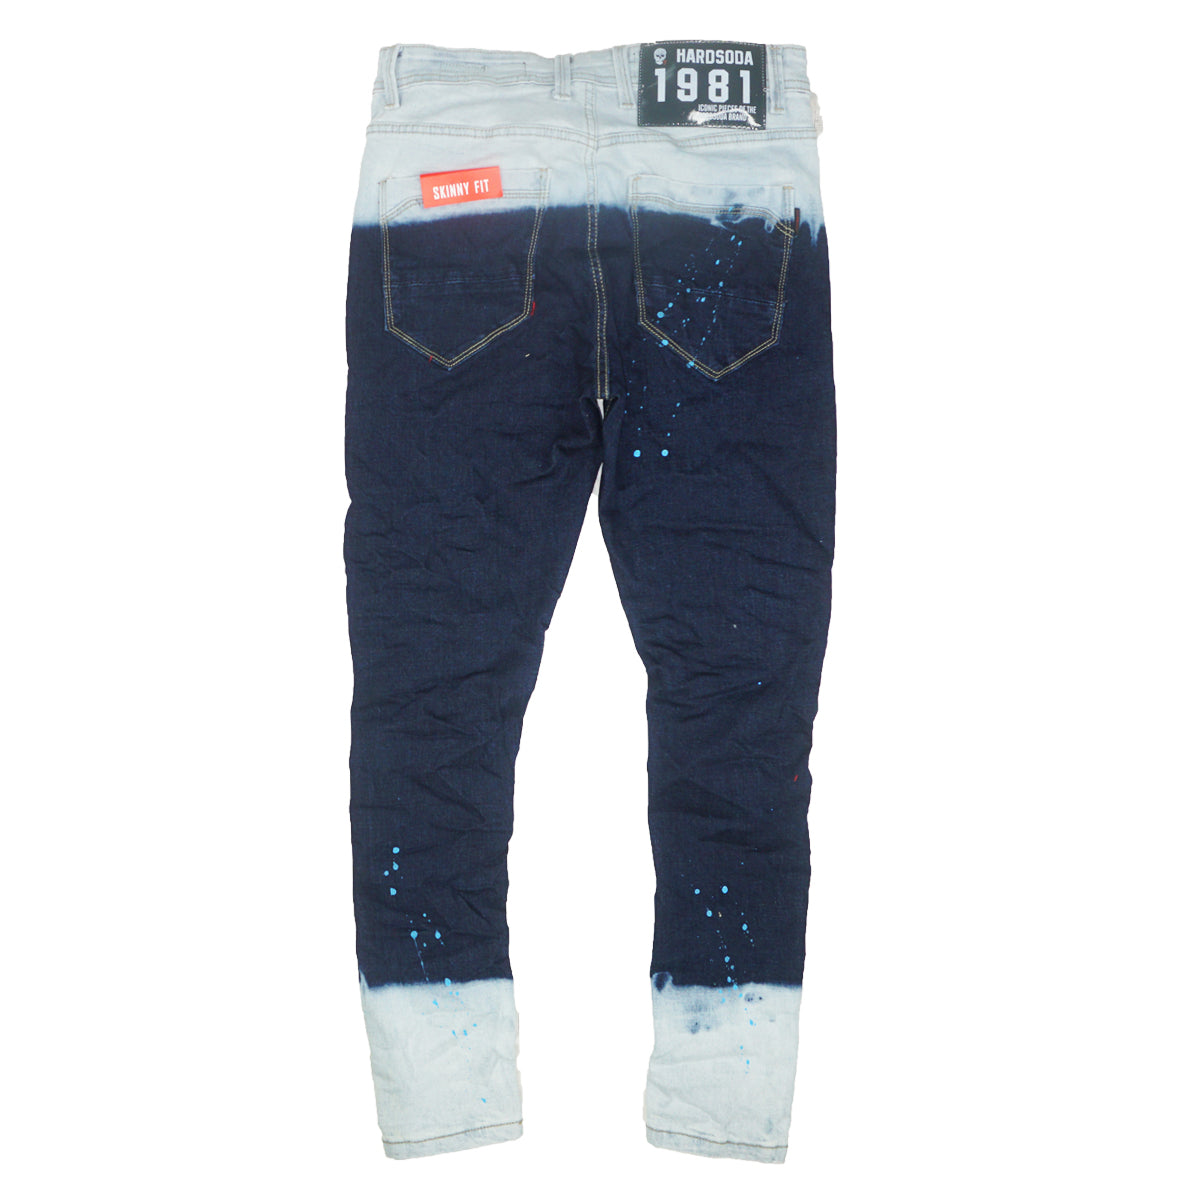 The Look Denim ( Blue / Whte / Red ) / C3